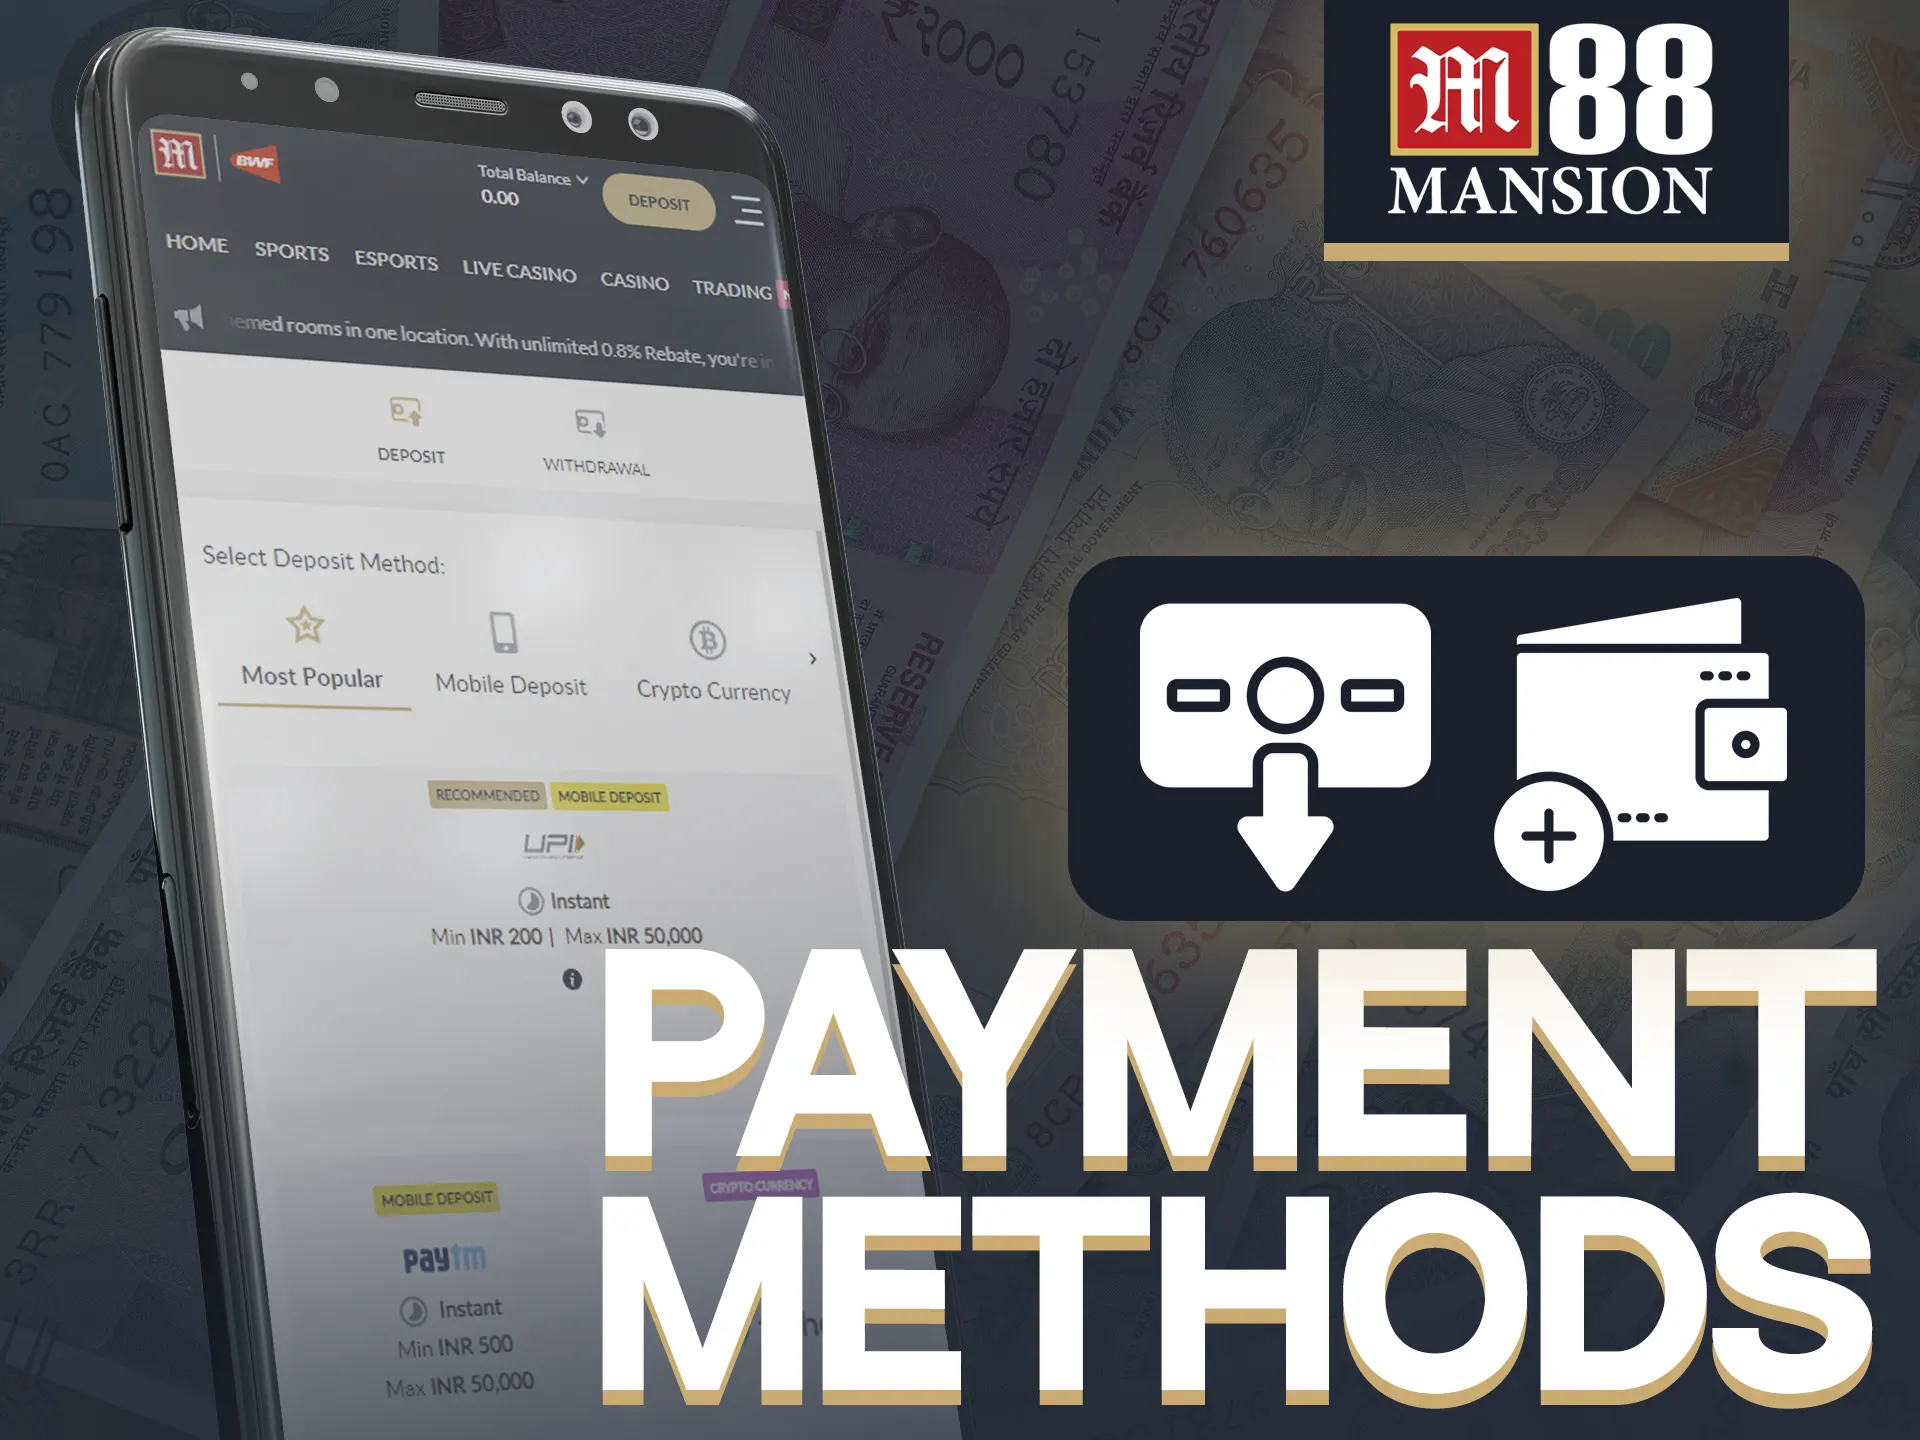 The M88 app offers various secure payment methods.